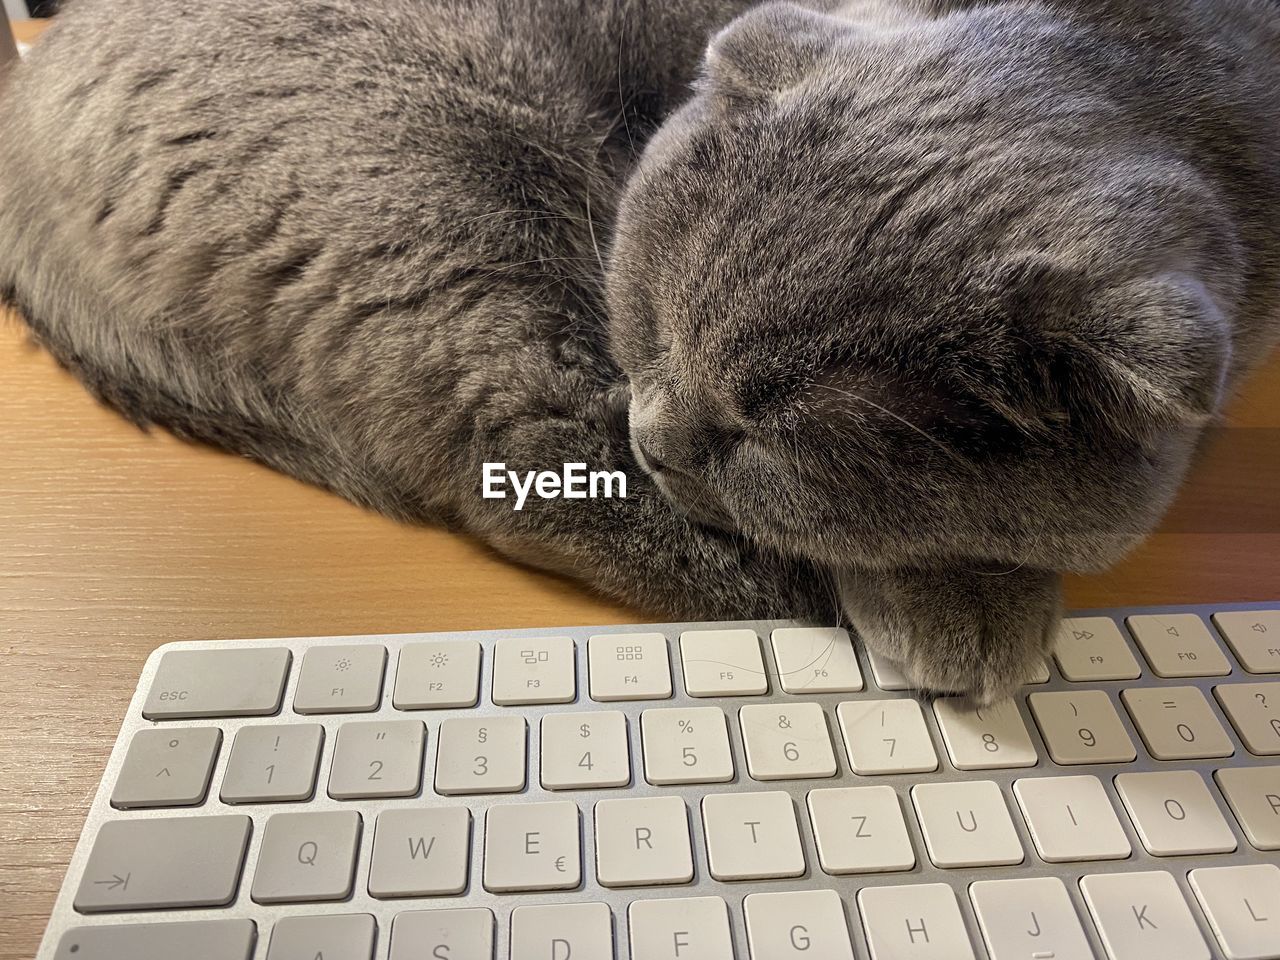 computer, animal themes, animal, computer keyboard, pet, keyboard, computer equipment, technology, cat, mammal, one animal, wireless technology, no people, laptop, close-up, communication, indoors, domestic animals, relaxation, high angle view, sleeping